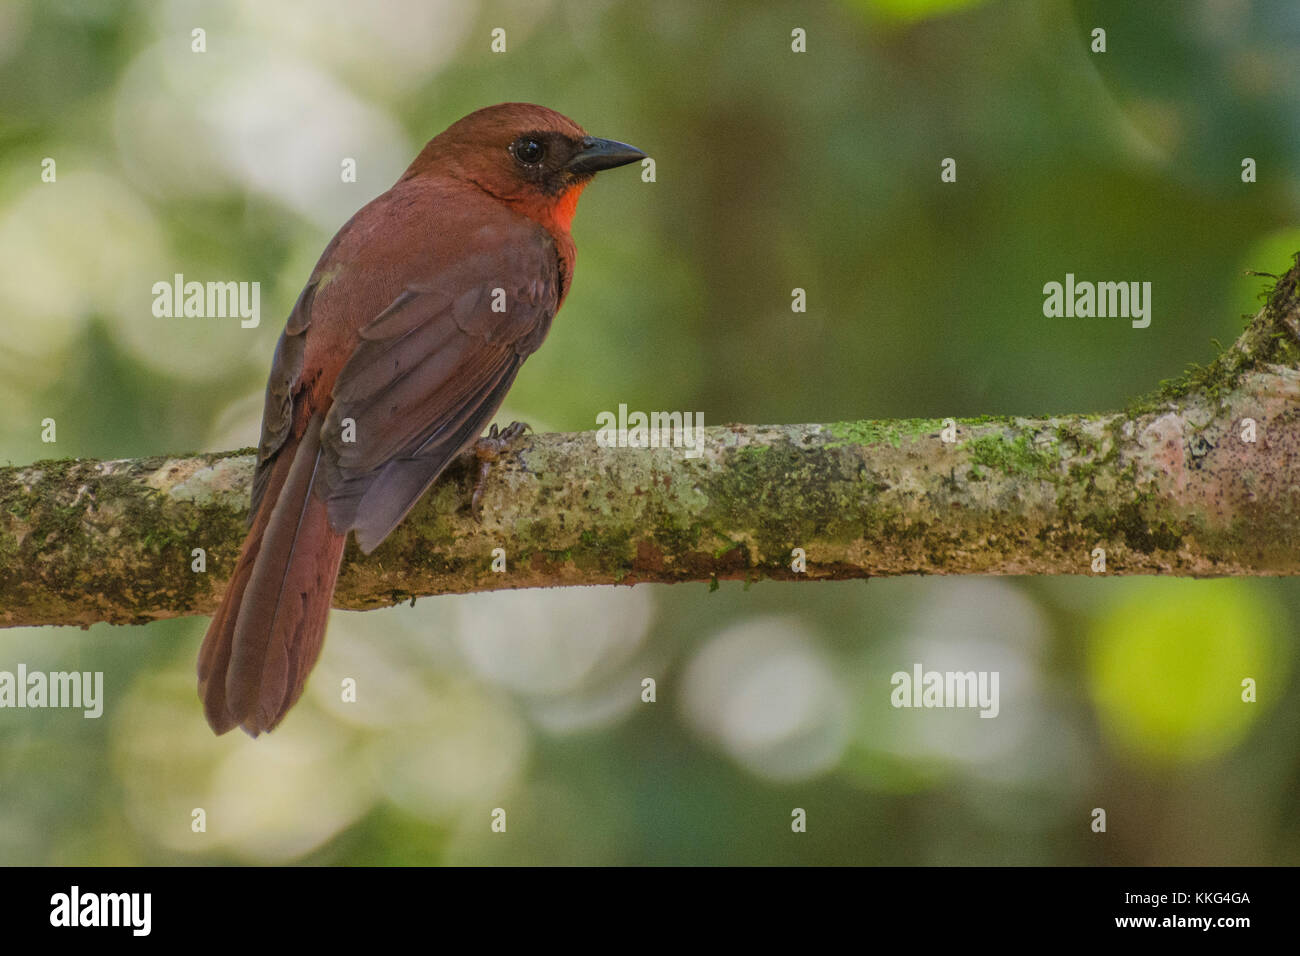 A bird from the jungle in Belize. Stock Photo